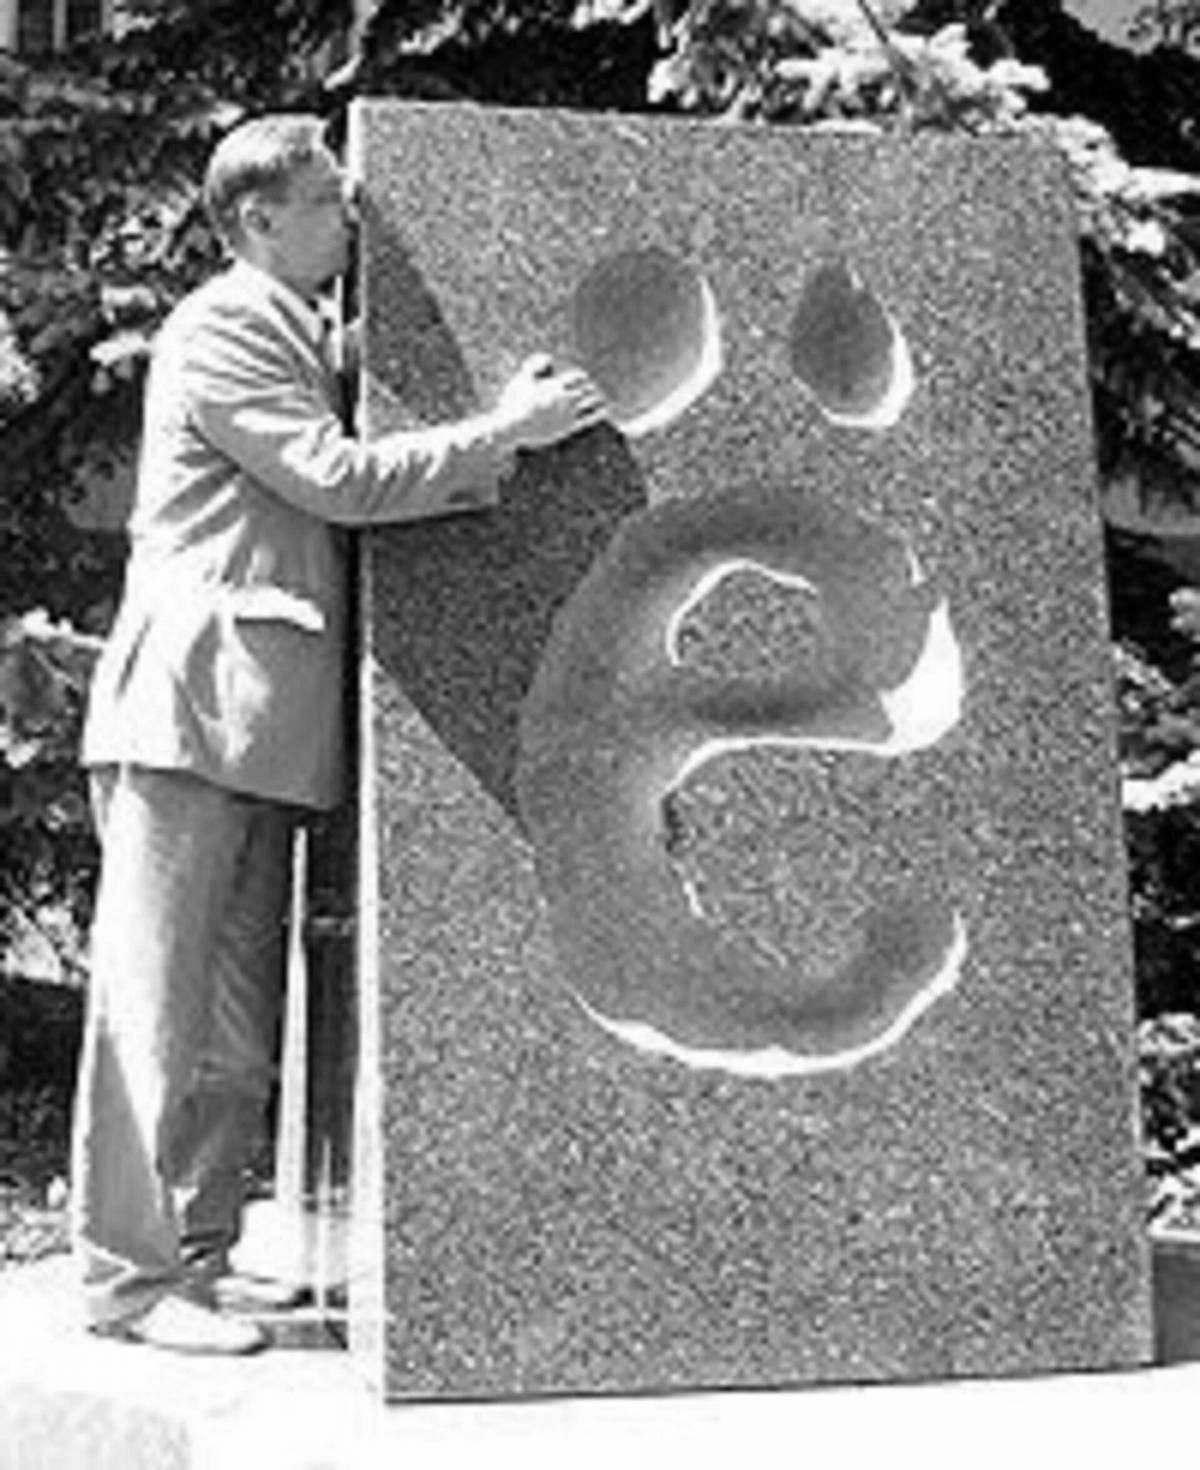 Coloring book large monument to the letter e